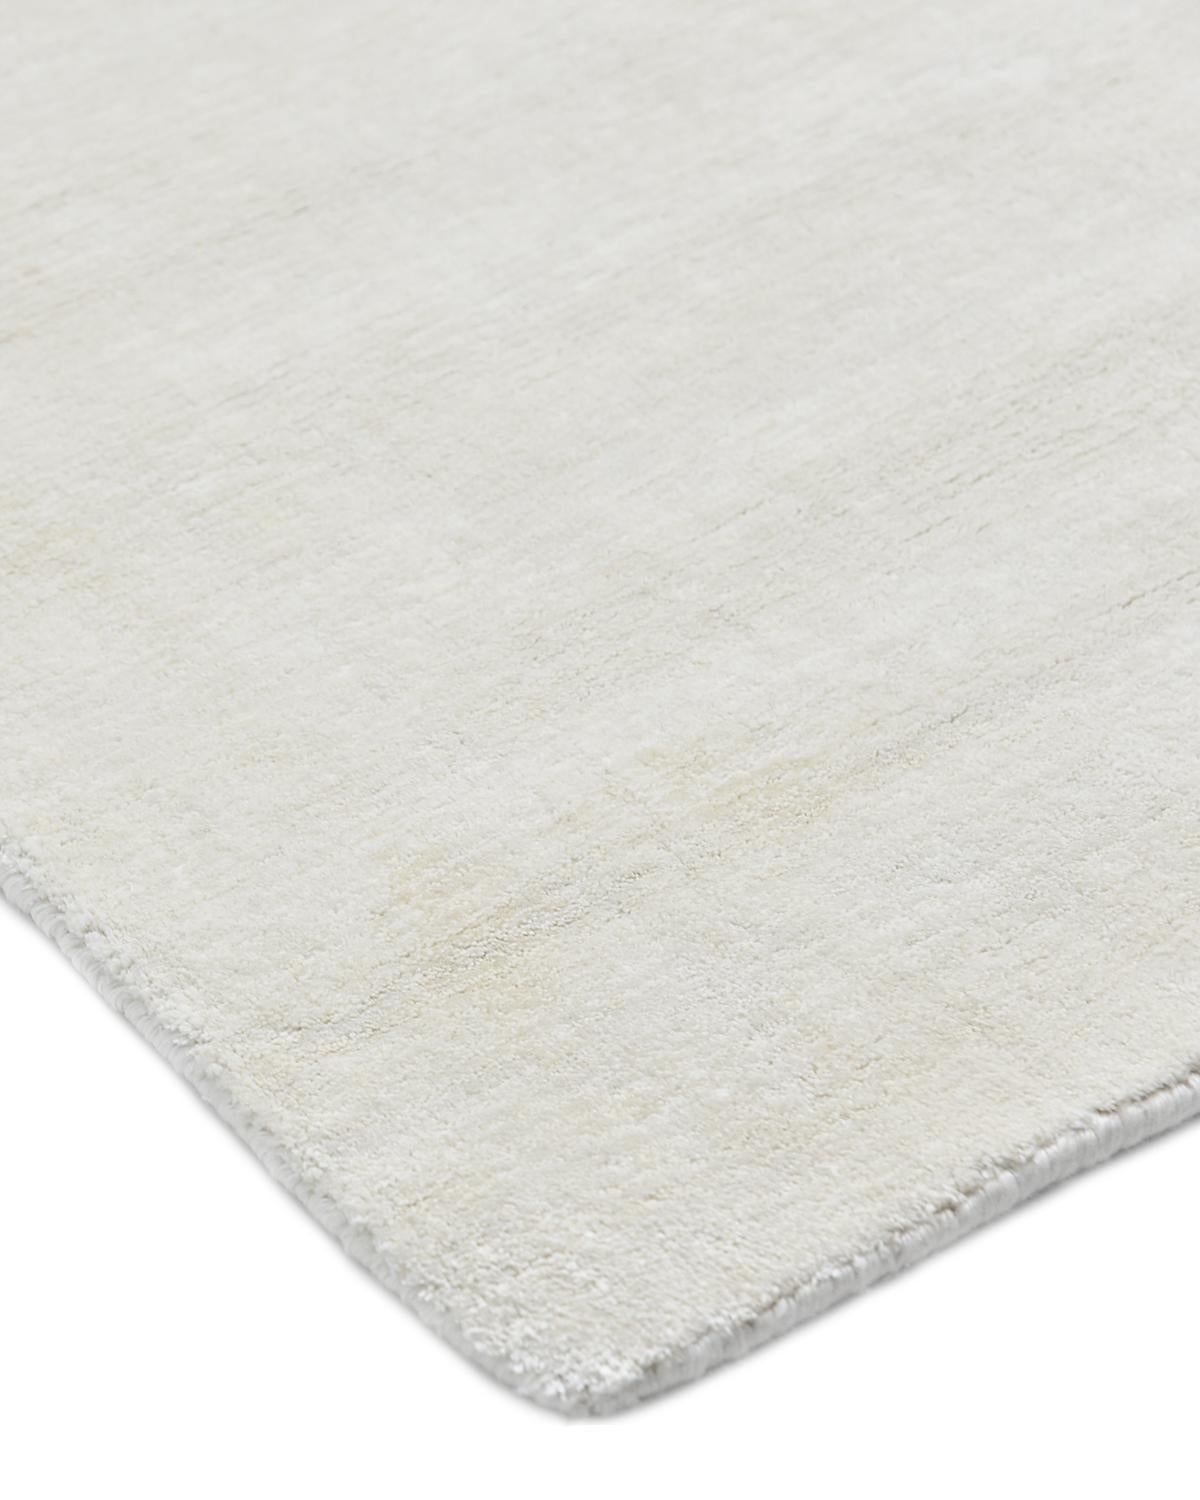 Color: Ivory. Made In: India. 60% Linen, 30% Viscose, 10% Cotton. Subtle tone-on-tone stripes give the Solid collection a depth and sophistication all its own. These rugs can pull the disparate elements of a room into a beautifully cohesive whole;